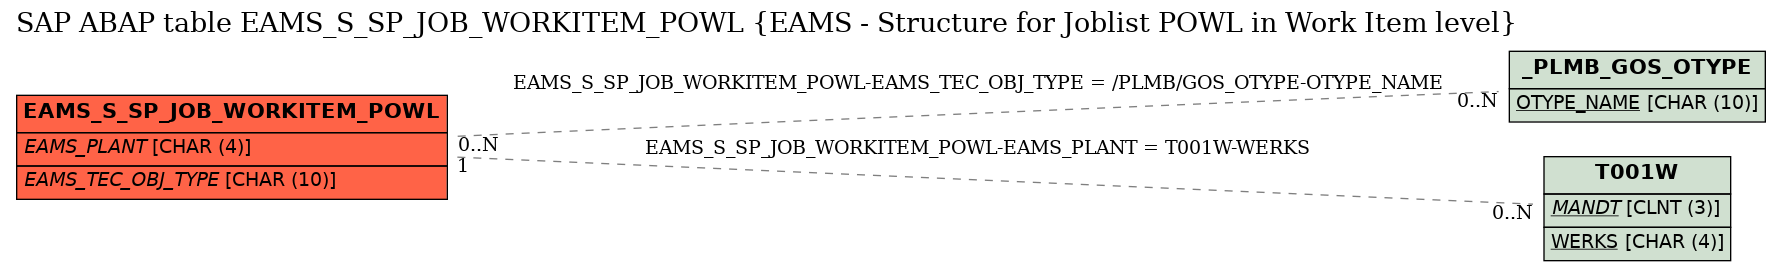 E-R Diagram for table EAMS_S_SP_JOB_WORKITEM_POWL (EAMS - Structure for Joblist POWL in Work Item level)